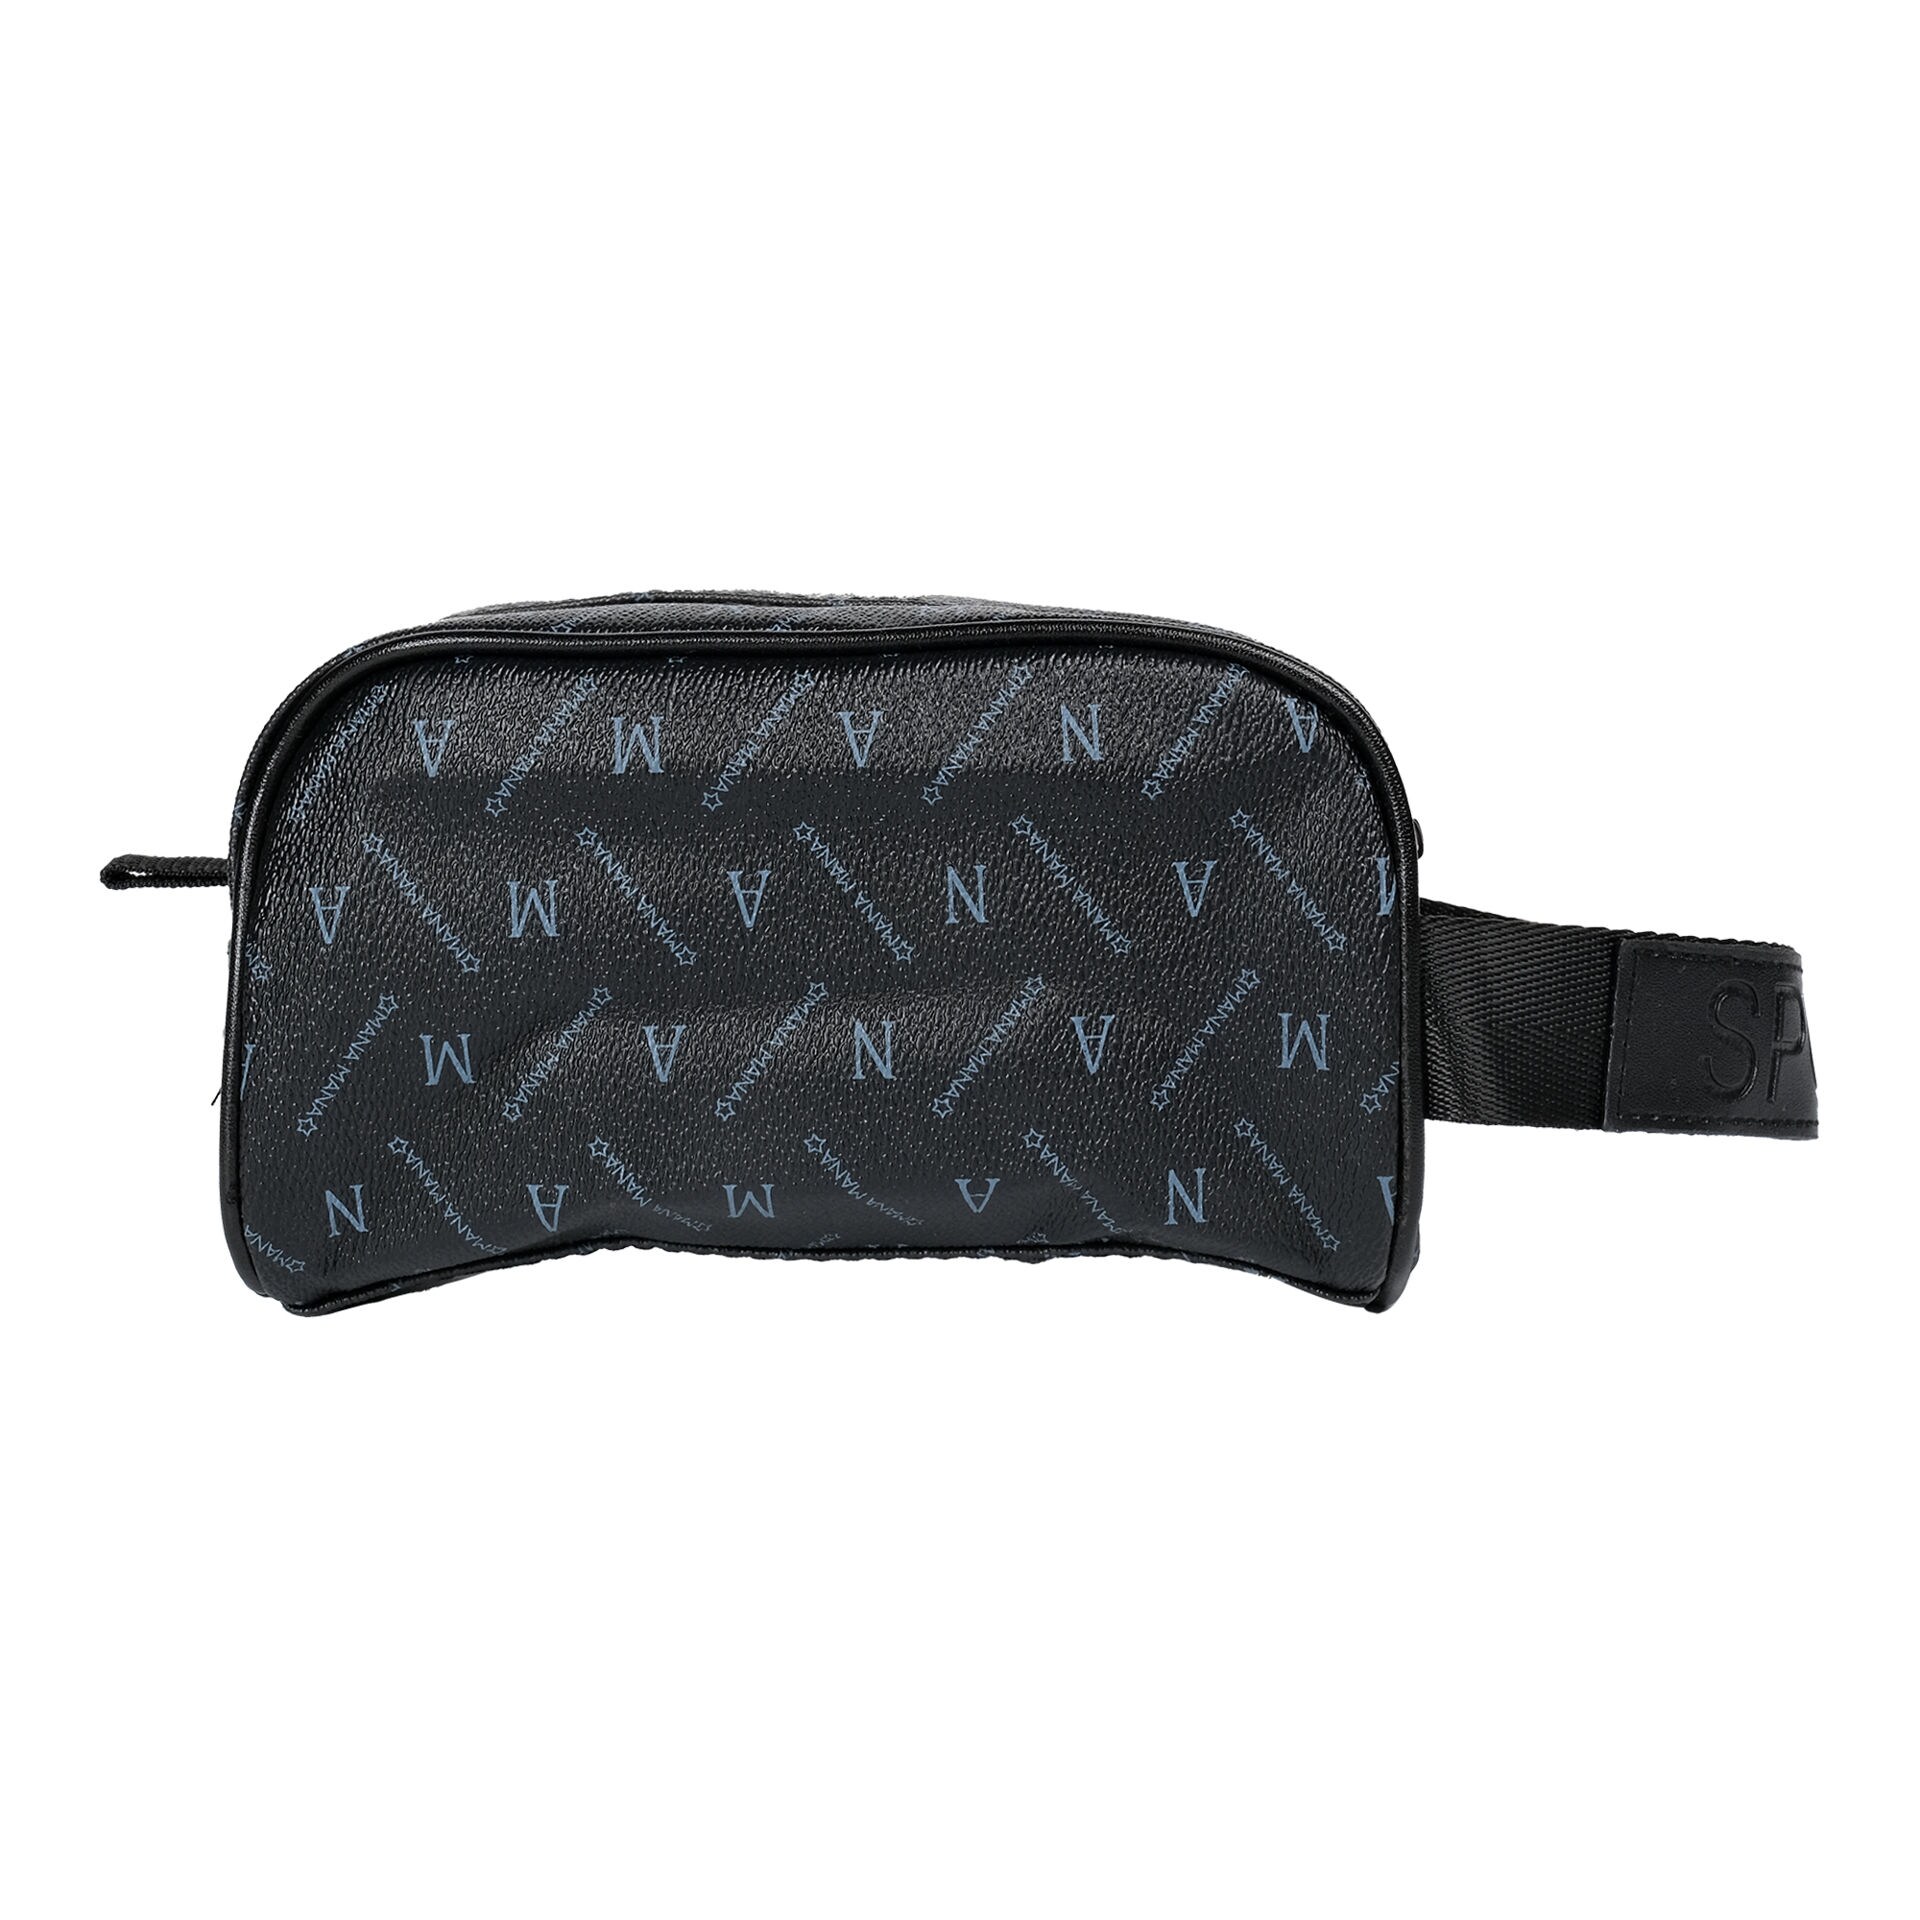 Designer Mens Dark Grey Clutch Bag Classic Print, Waterproof, Fashionable  Leather, Small Purse, Card Pack, Crossbody Clutches From Superjerseys8,  $60.94 | DHgate.Com